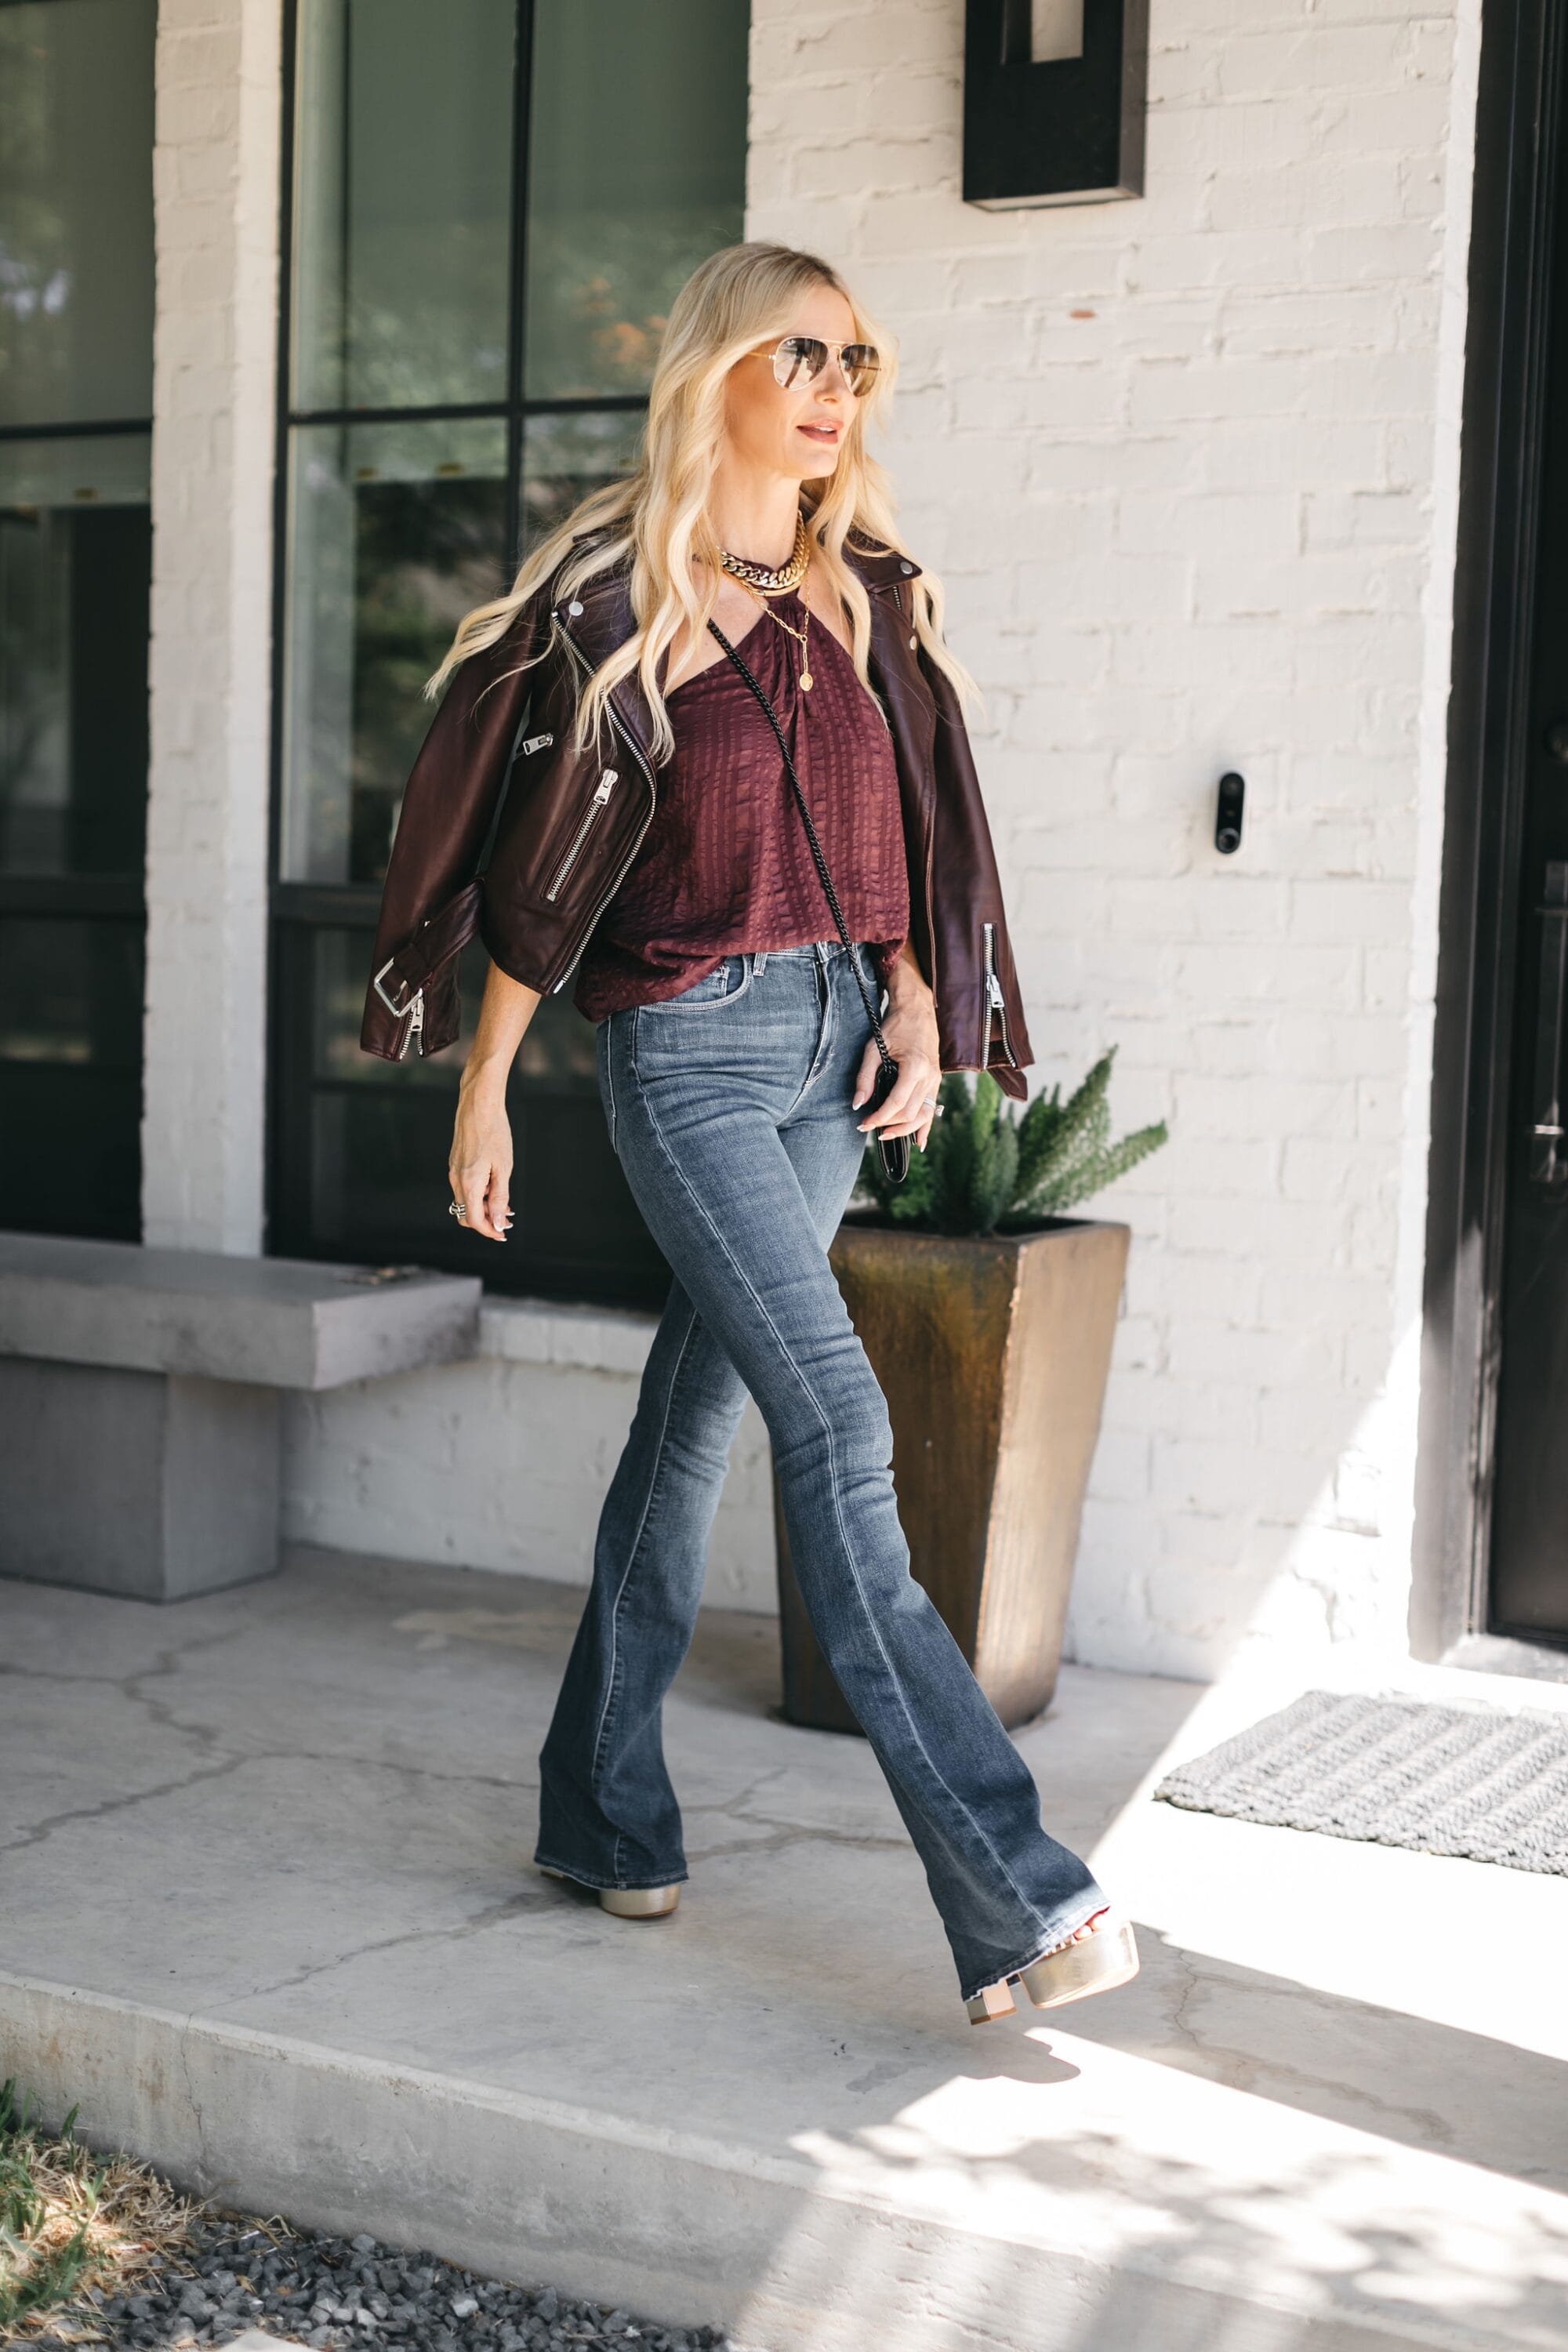 Over 40 fashion influencer wearing Marty Flare jeans from L'agence as one of the best selling items in 2022.